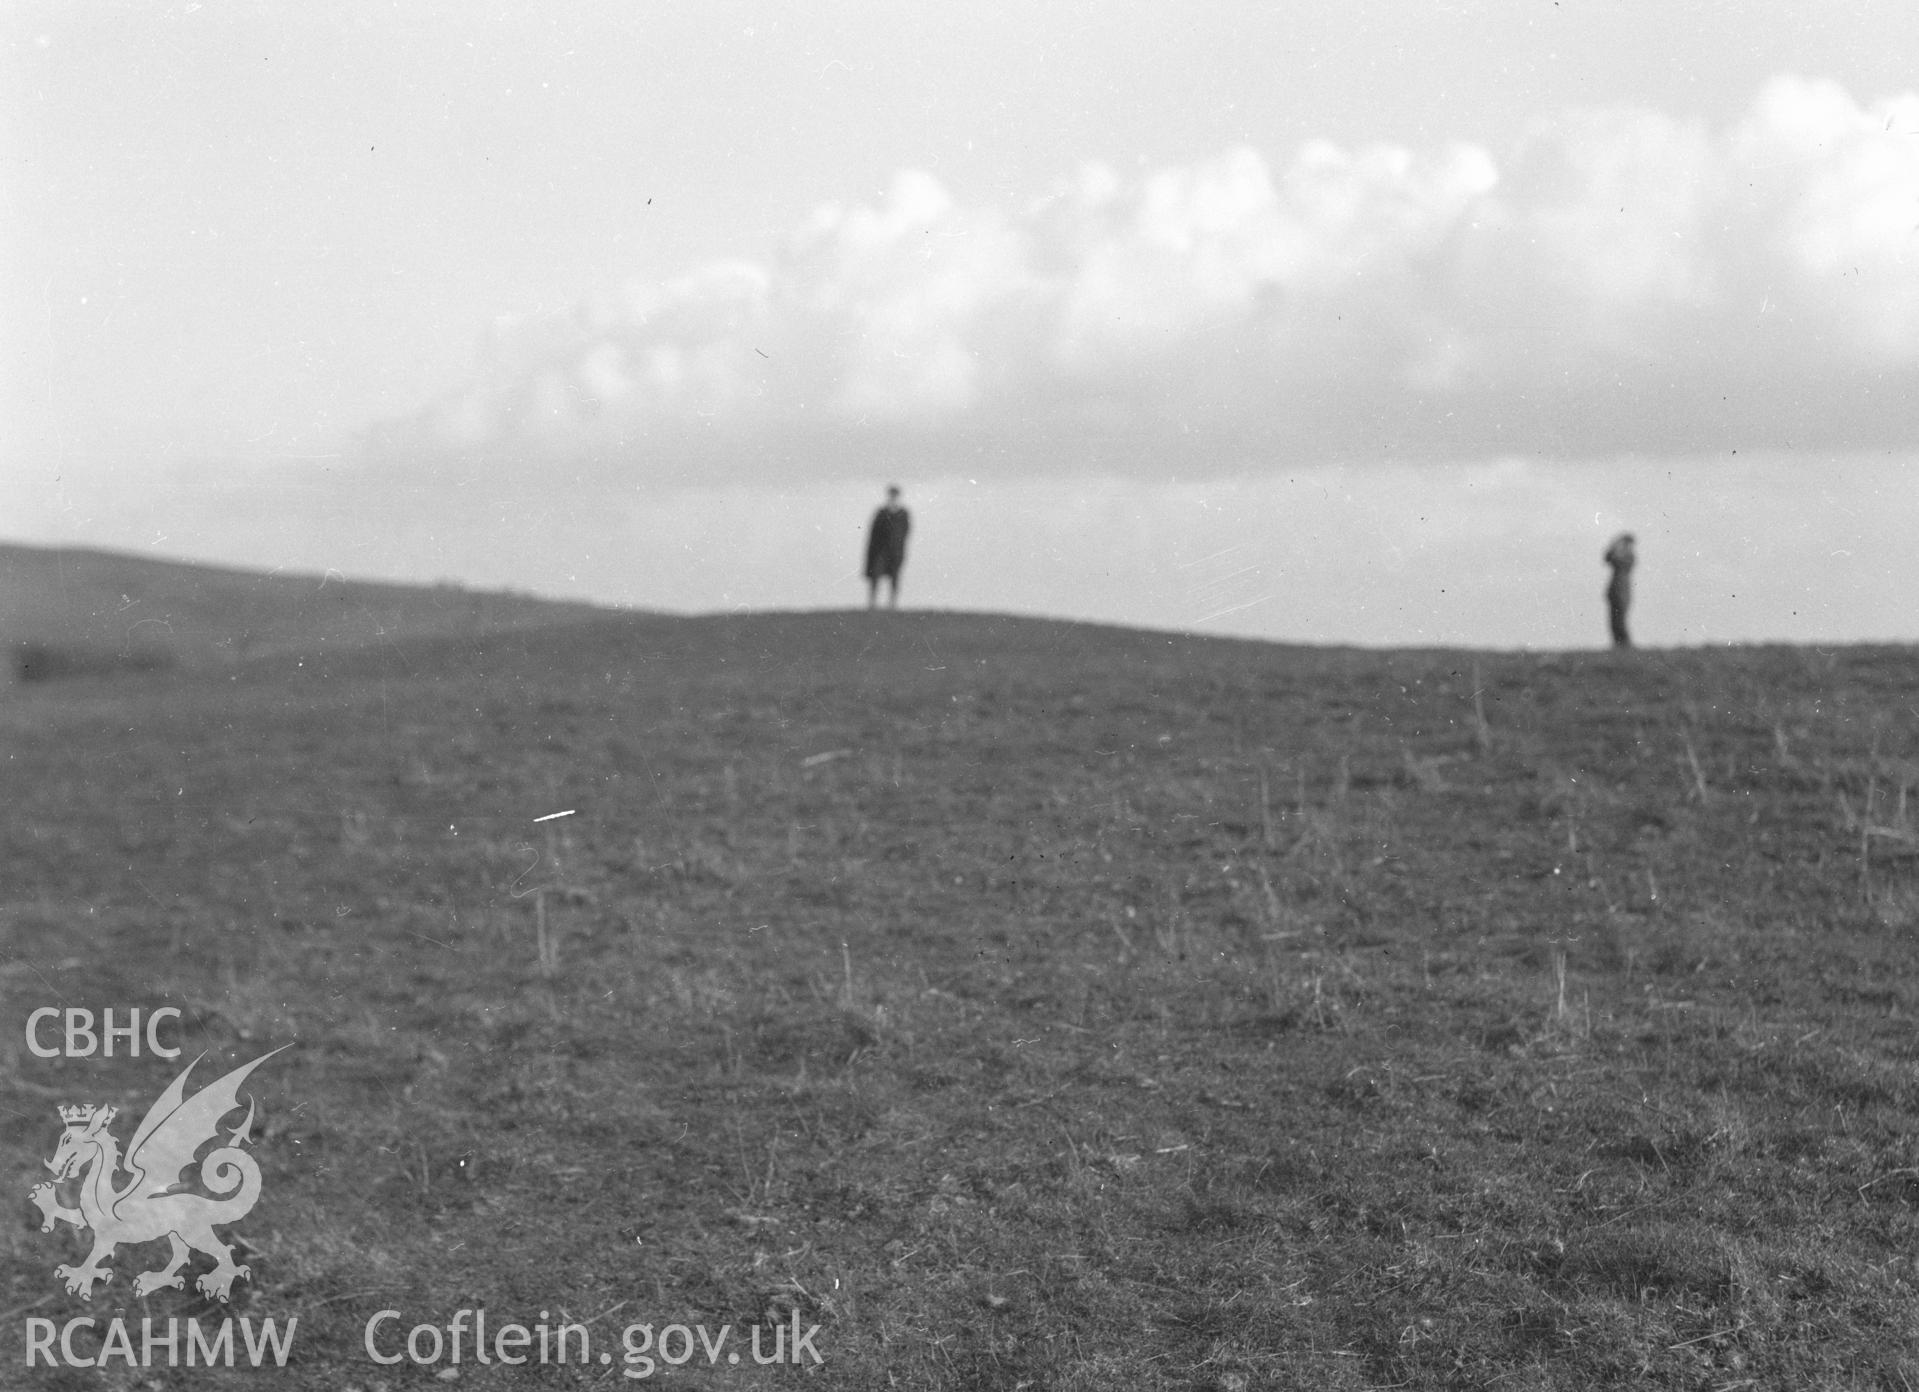 Digital copy of a nitrate negative showing Bryn Awel barrow, Prestatyn. From the Cadw Monuments in Care Collection.